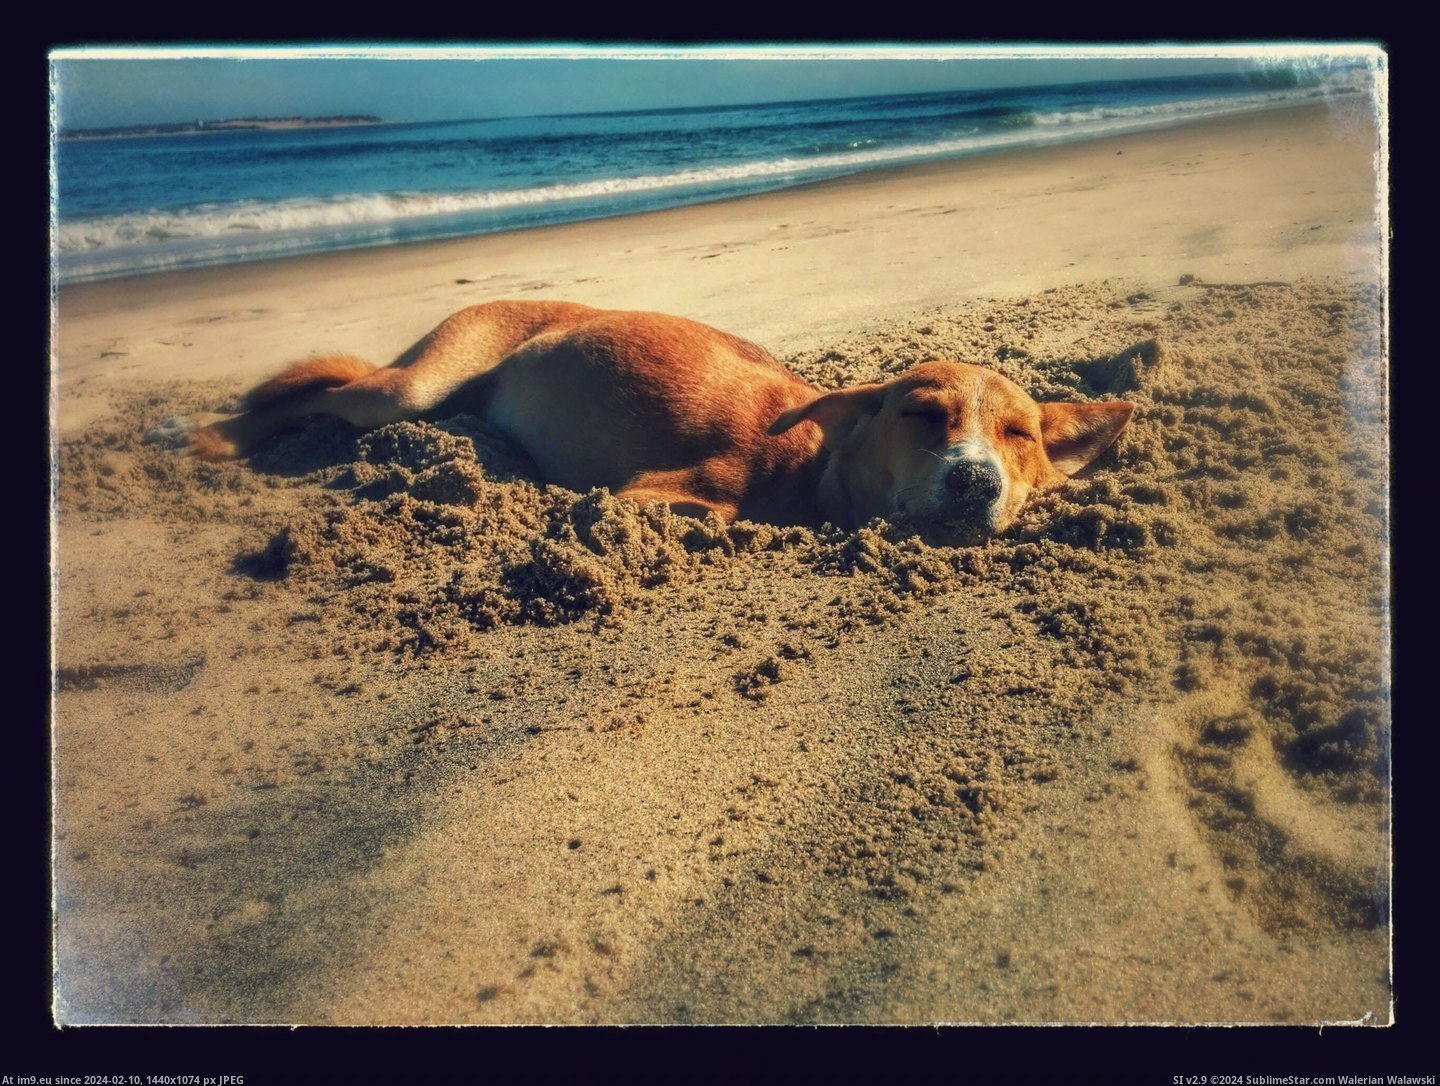 [Aww] I visited Sri-Lanka recently, while sitting on the beach this guy came and dug a hole next to us, got in and went to sleep (in My r/AWW favs)